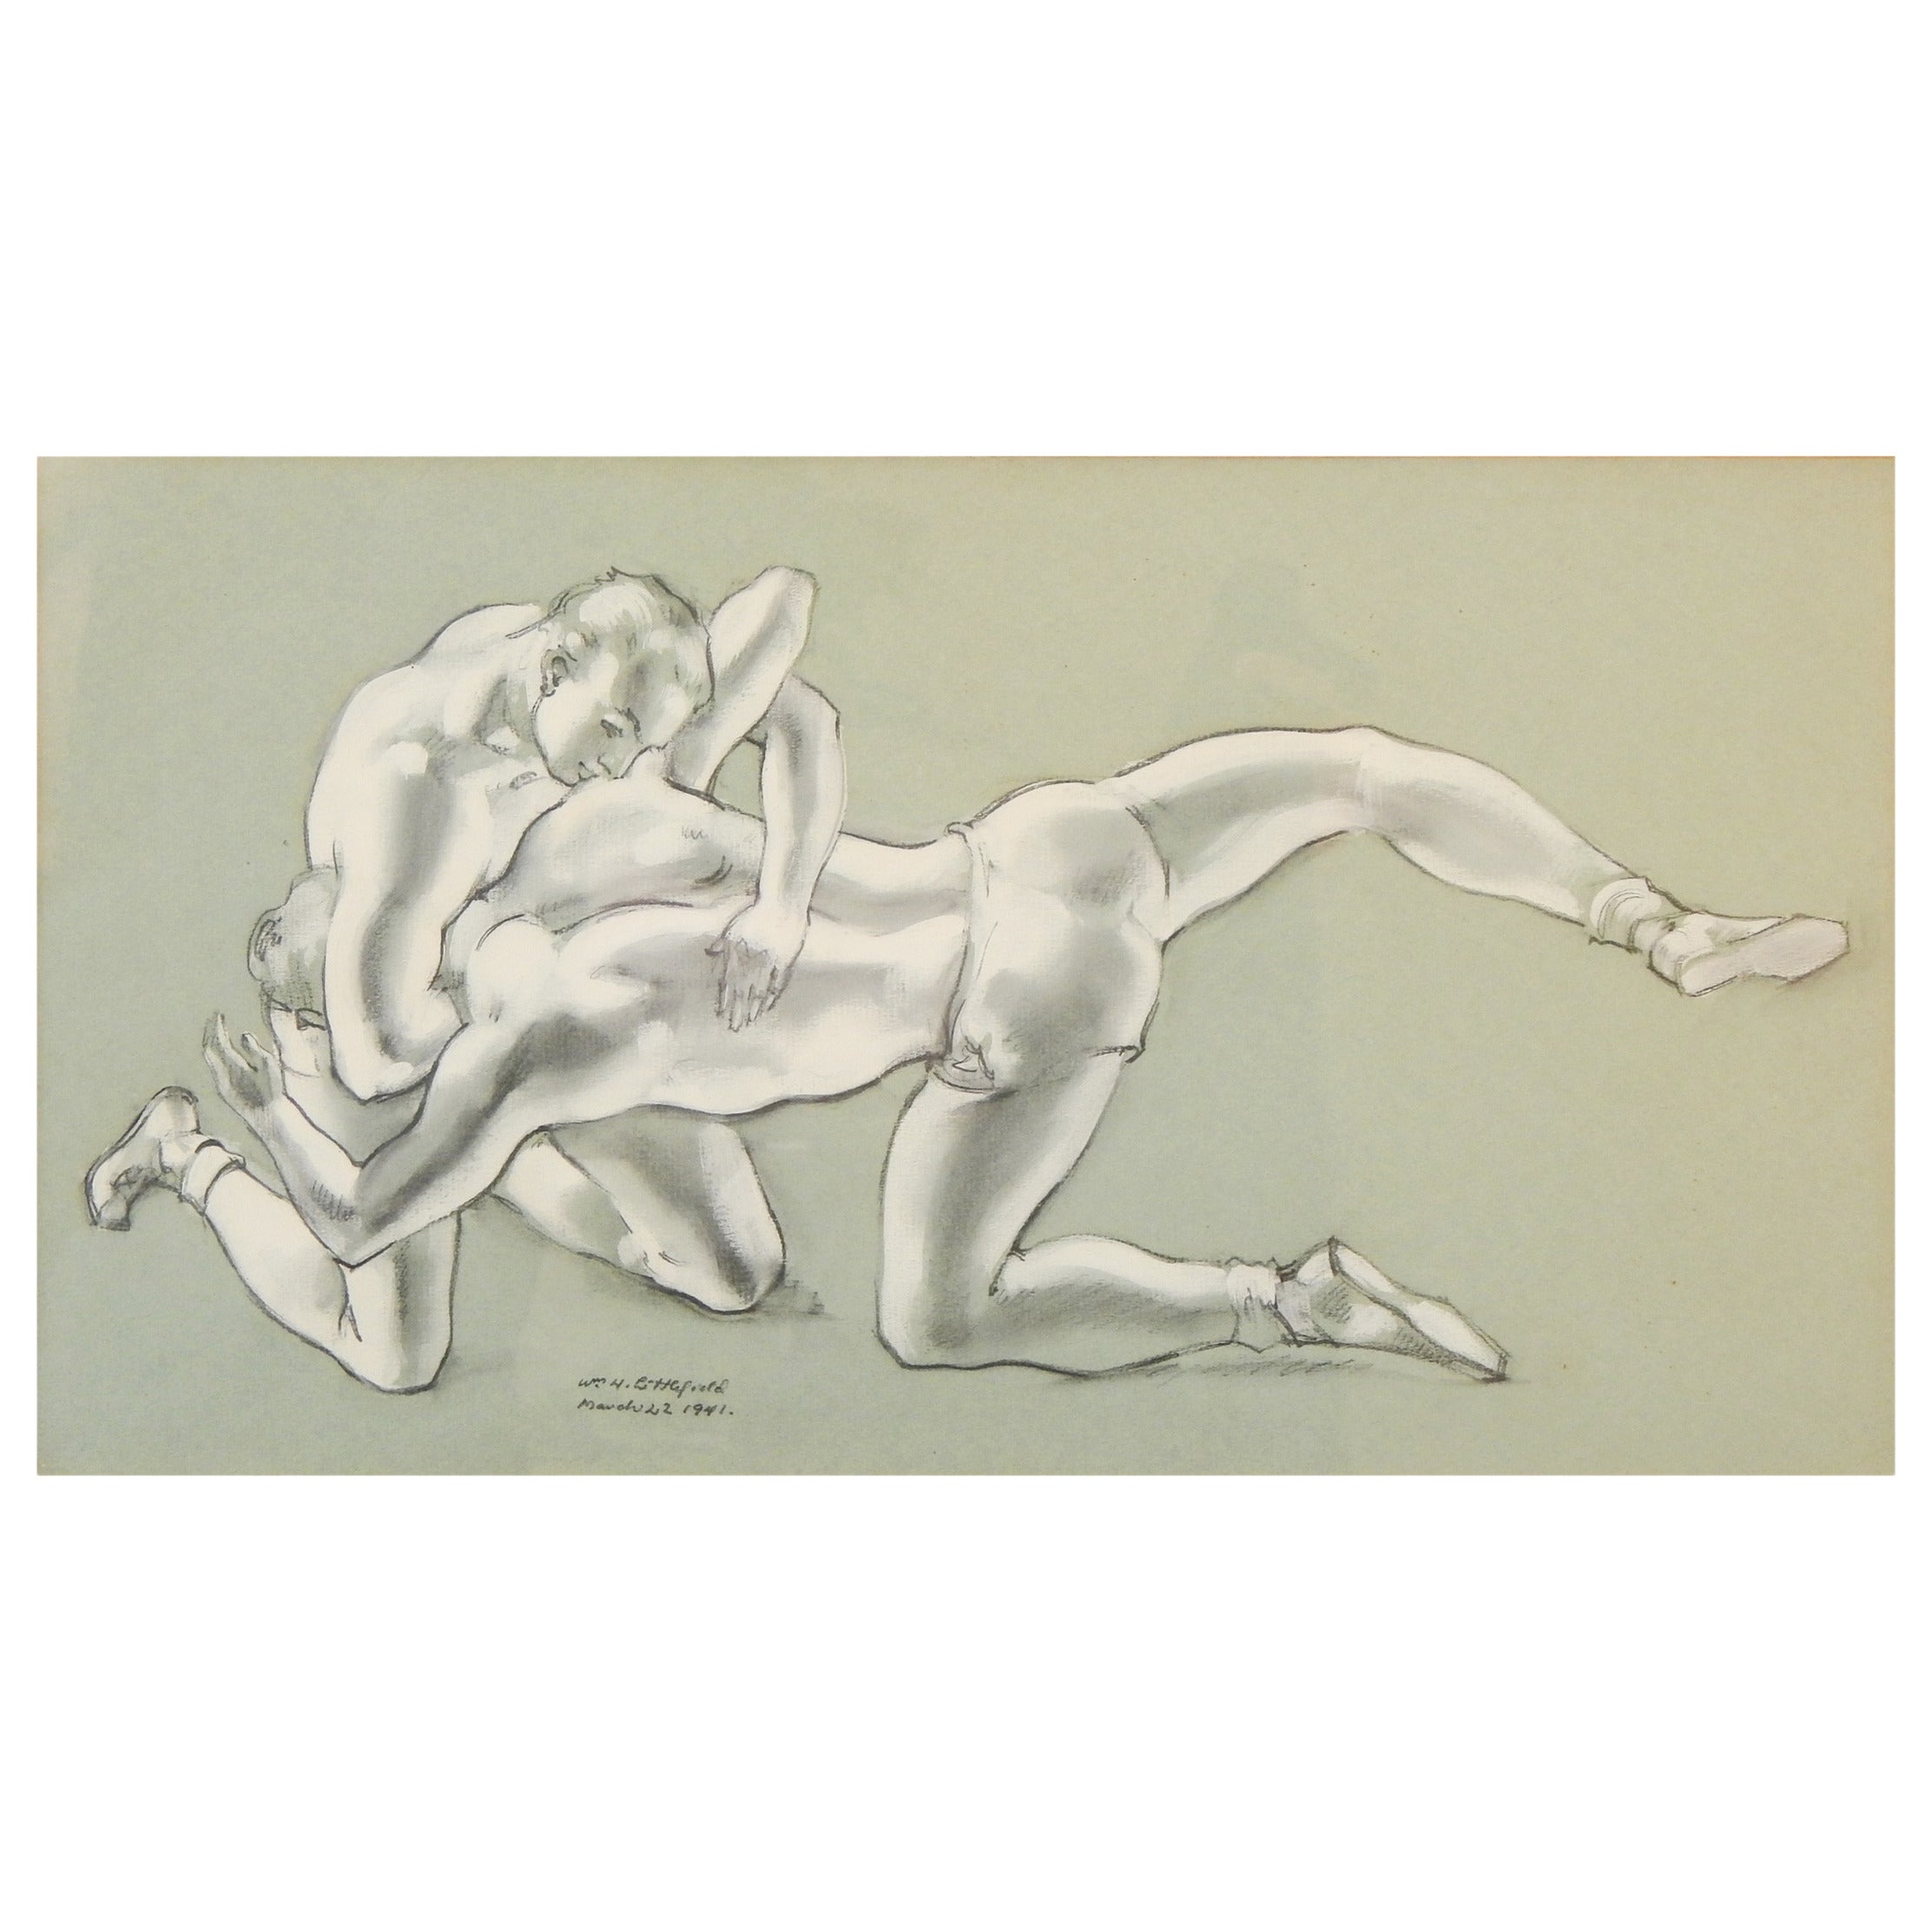 "Headlock, " Art Deco Painting with Wrestling Theme by Littlefield, 1941 For Sale